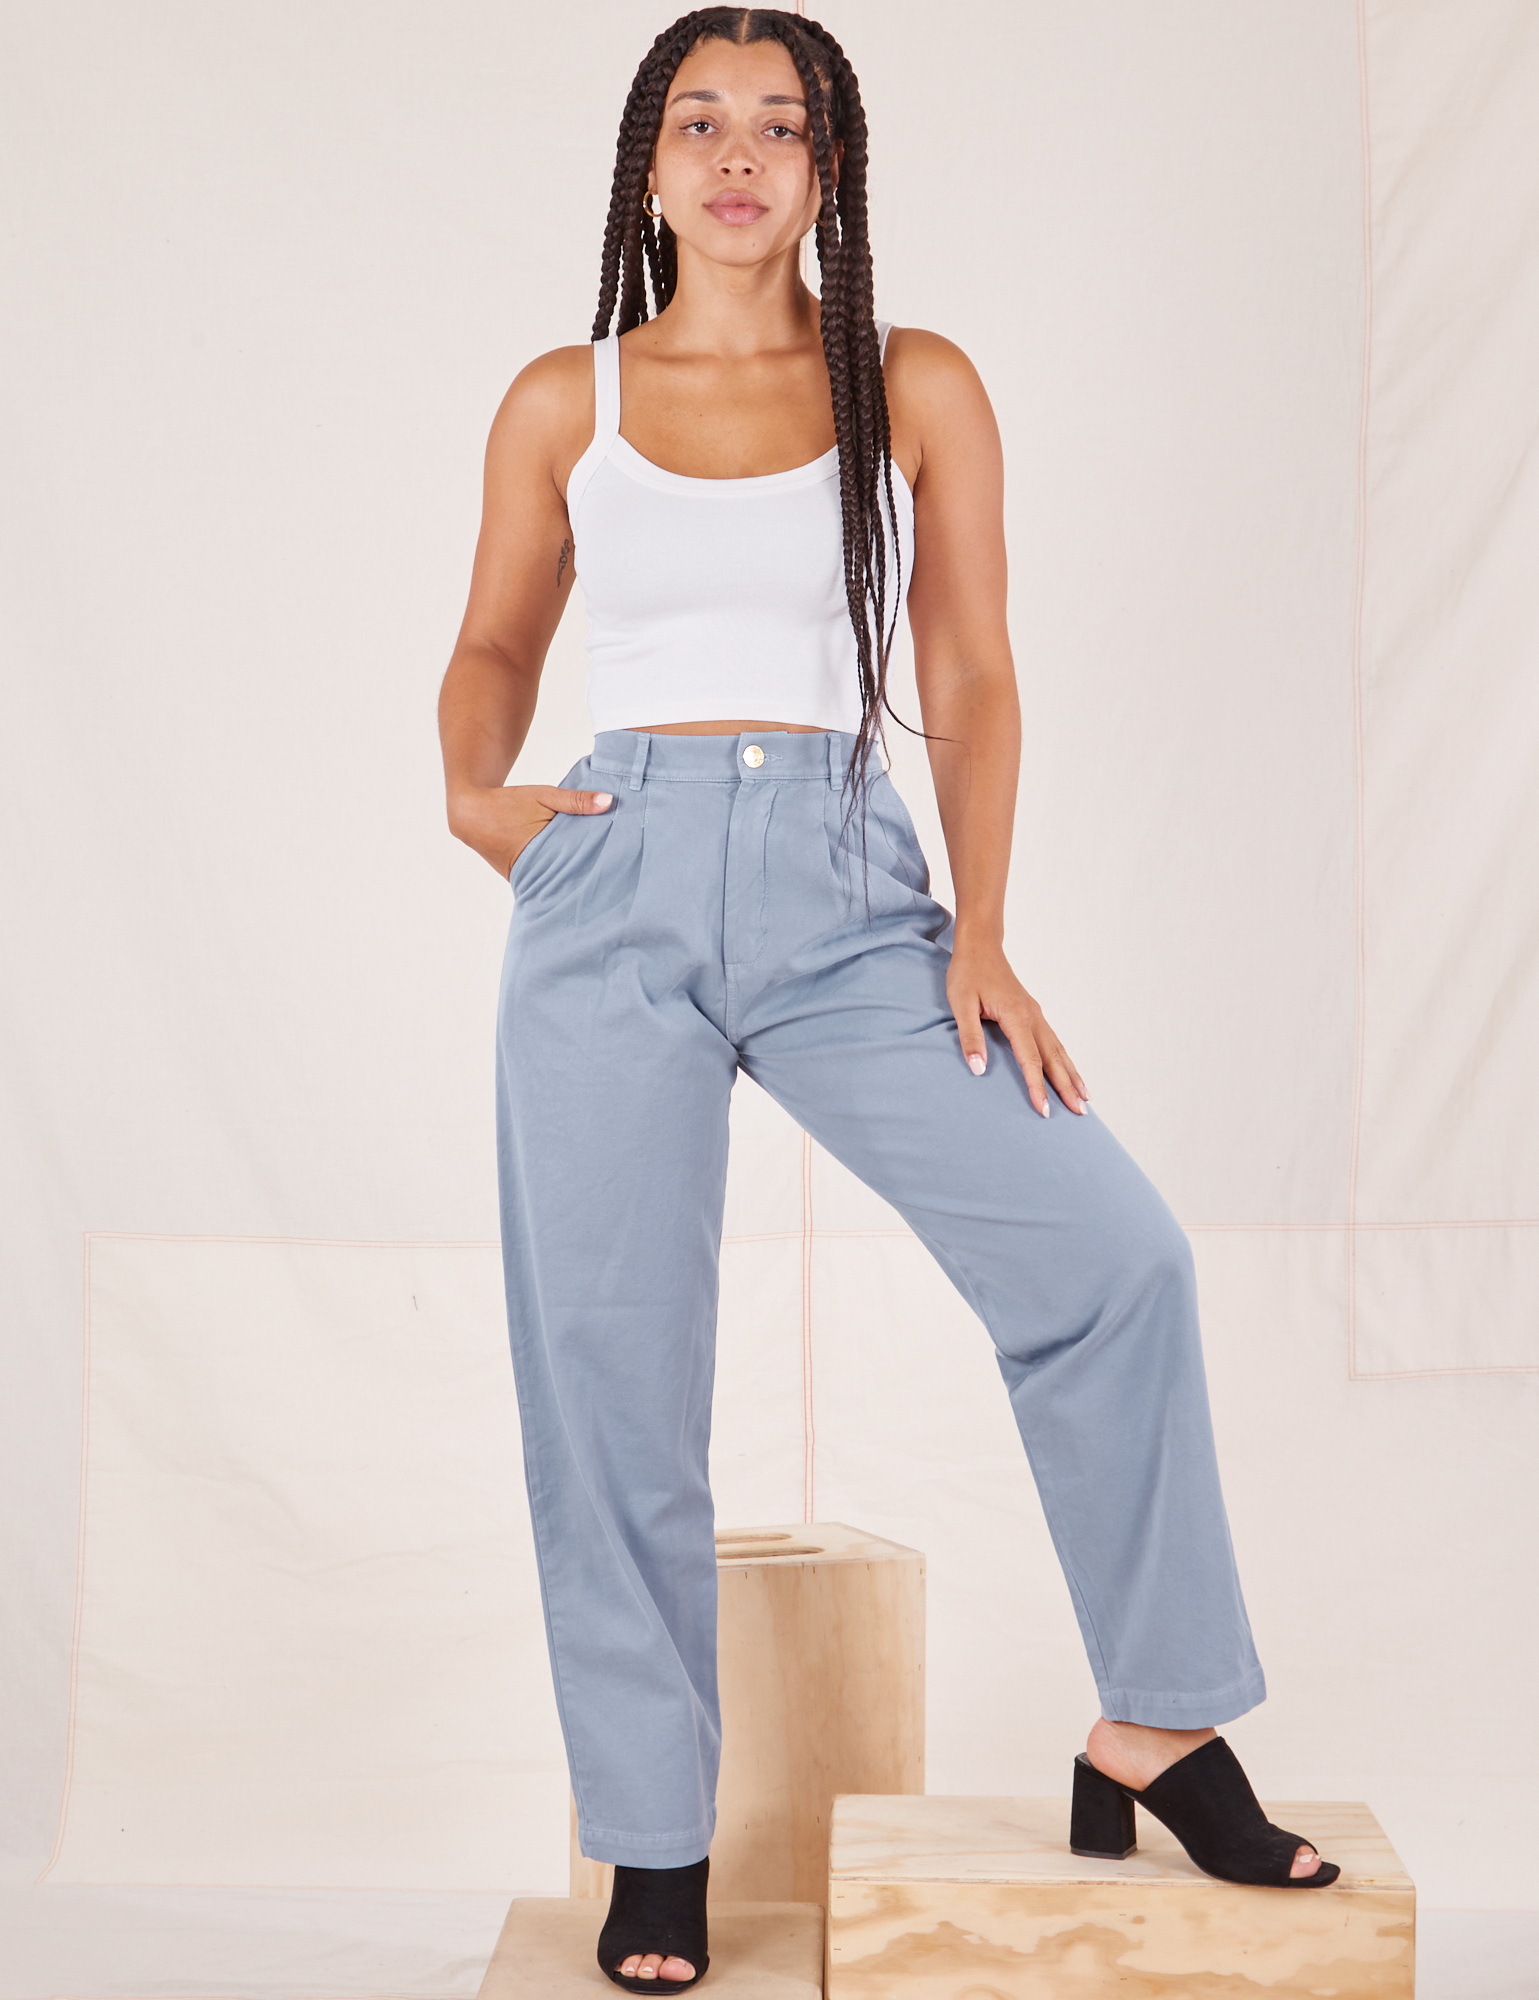 Gabi is 5&#39;7&quot; and wearing XXS Organic Trousers in Periwinkle paired with vintage off-white Cropped Cami